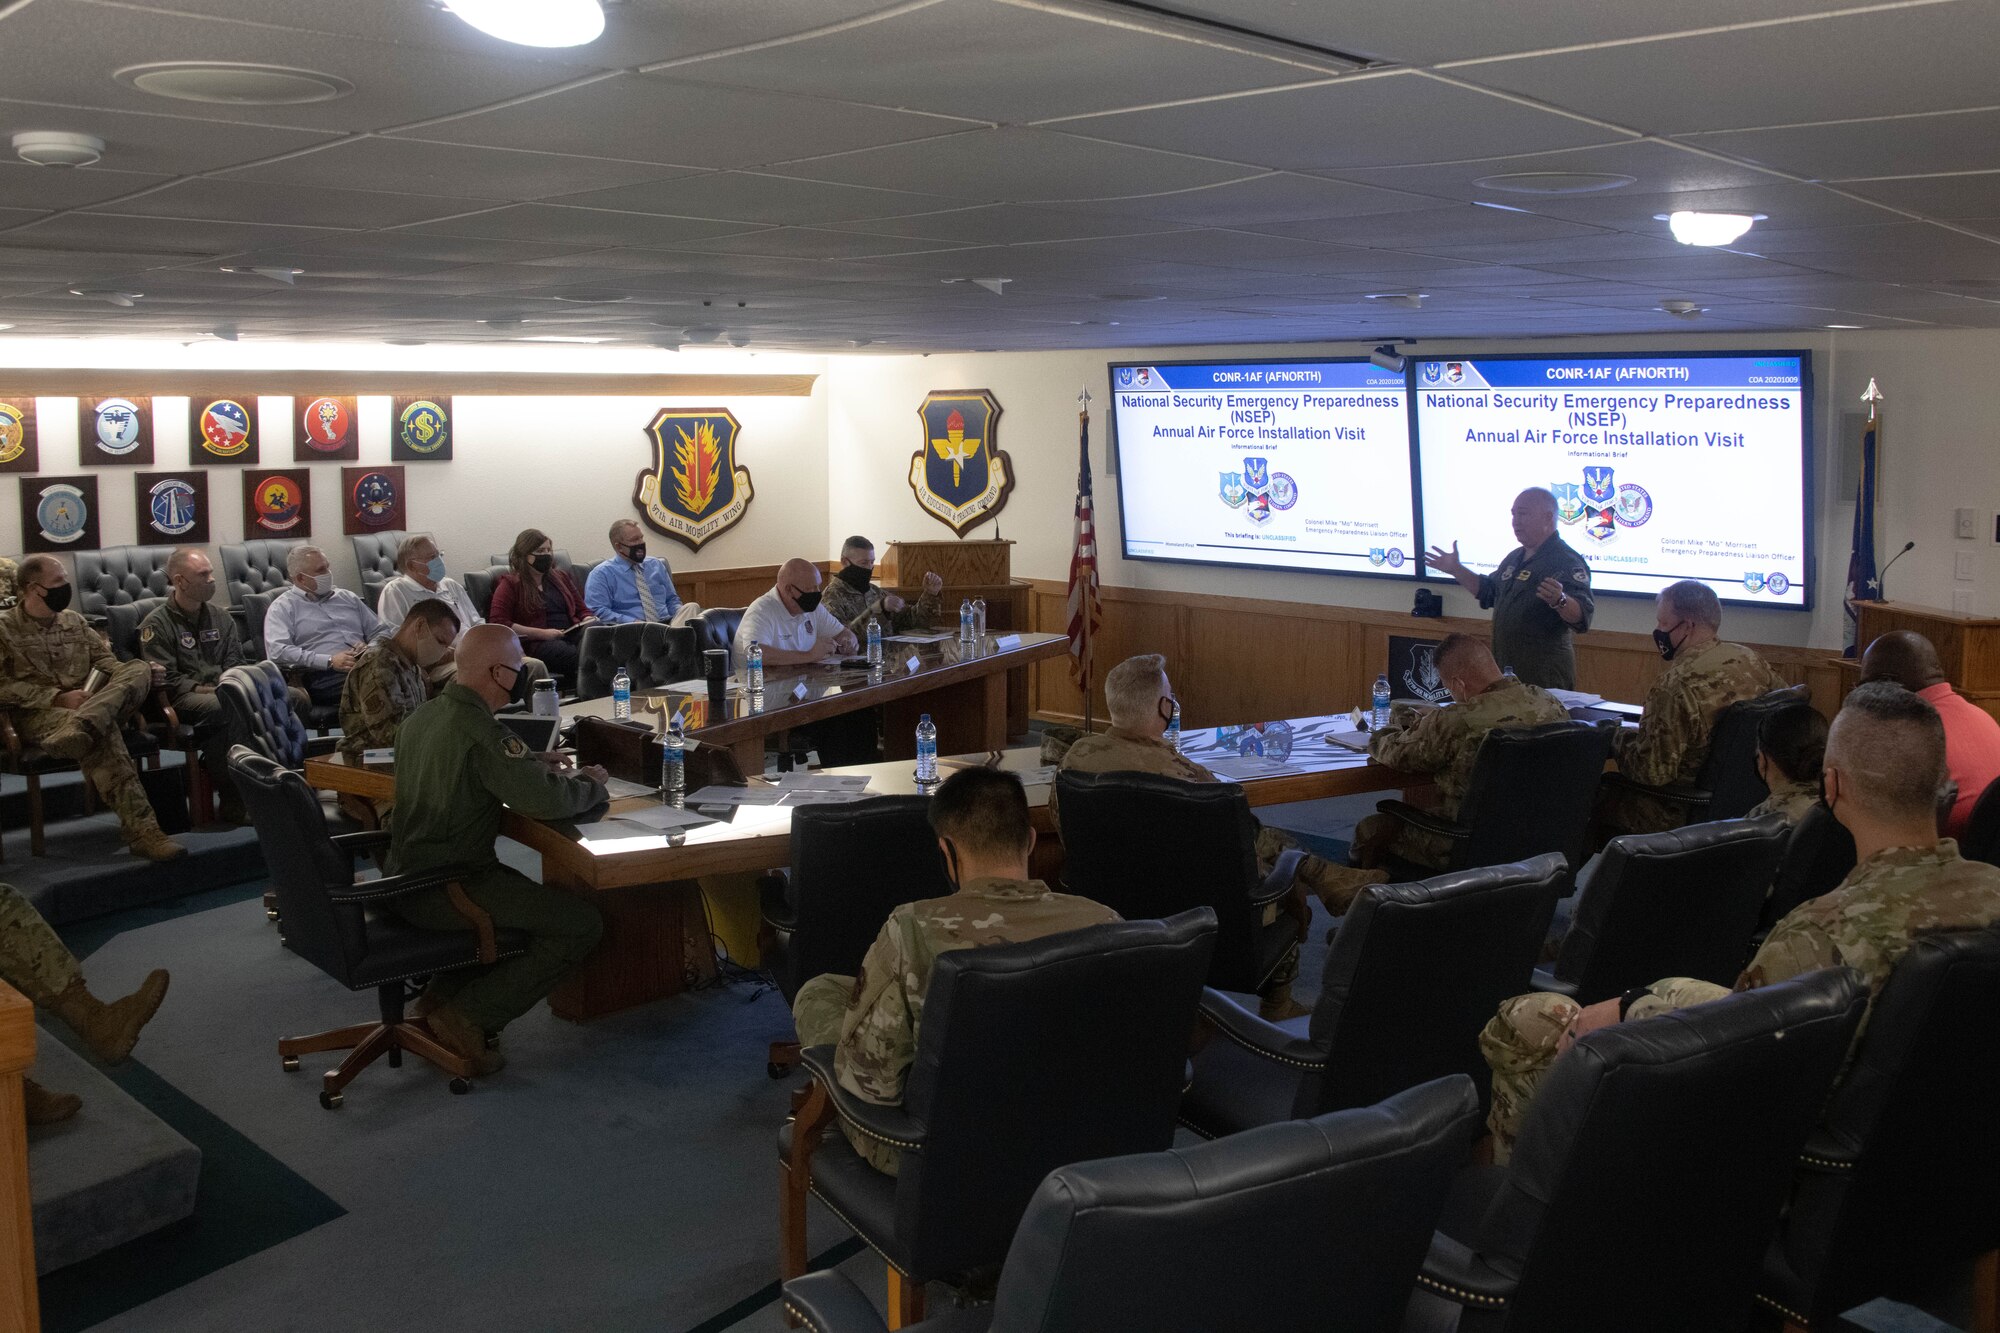 U.S. Air Force Col. Michael Morrisett, Emergency Preparedness Liaison Officer (EPLO) to Oklahoma, briefs senior leaders from the 97th Air Mobility Wing on Altus Air Force Base, Oklahoma, Aug. 19, 2021. As the EPLO, Morrisett is the liaison between the Department of Defense and any federal, state, or local agencies during a disaster. (U.S. Air Force photo by Airman 1st Class Trenton Jancze)